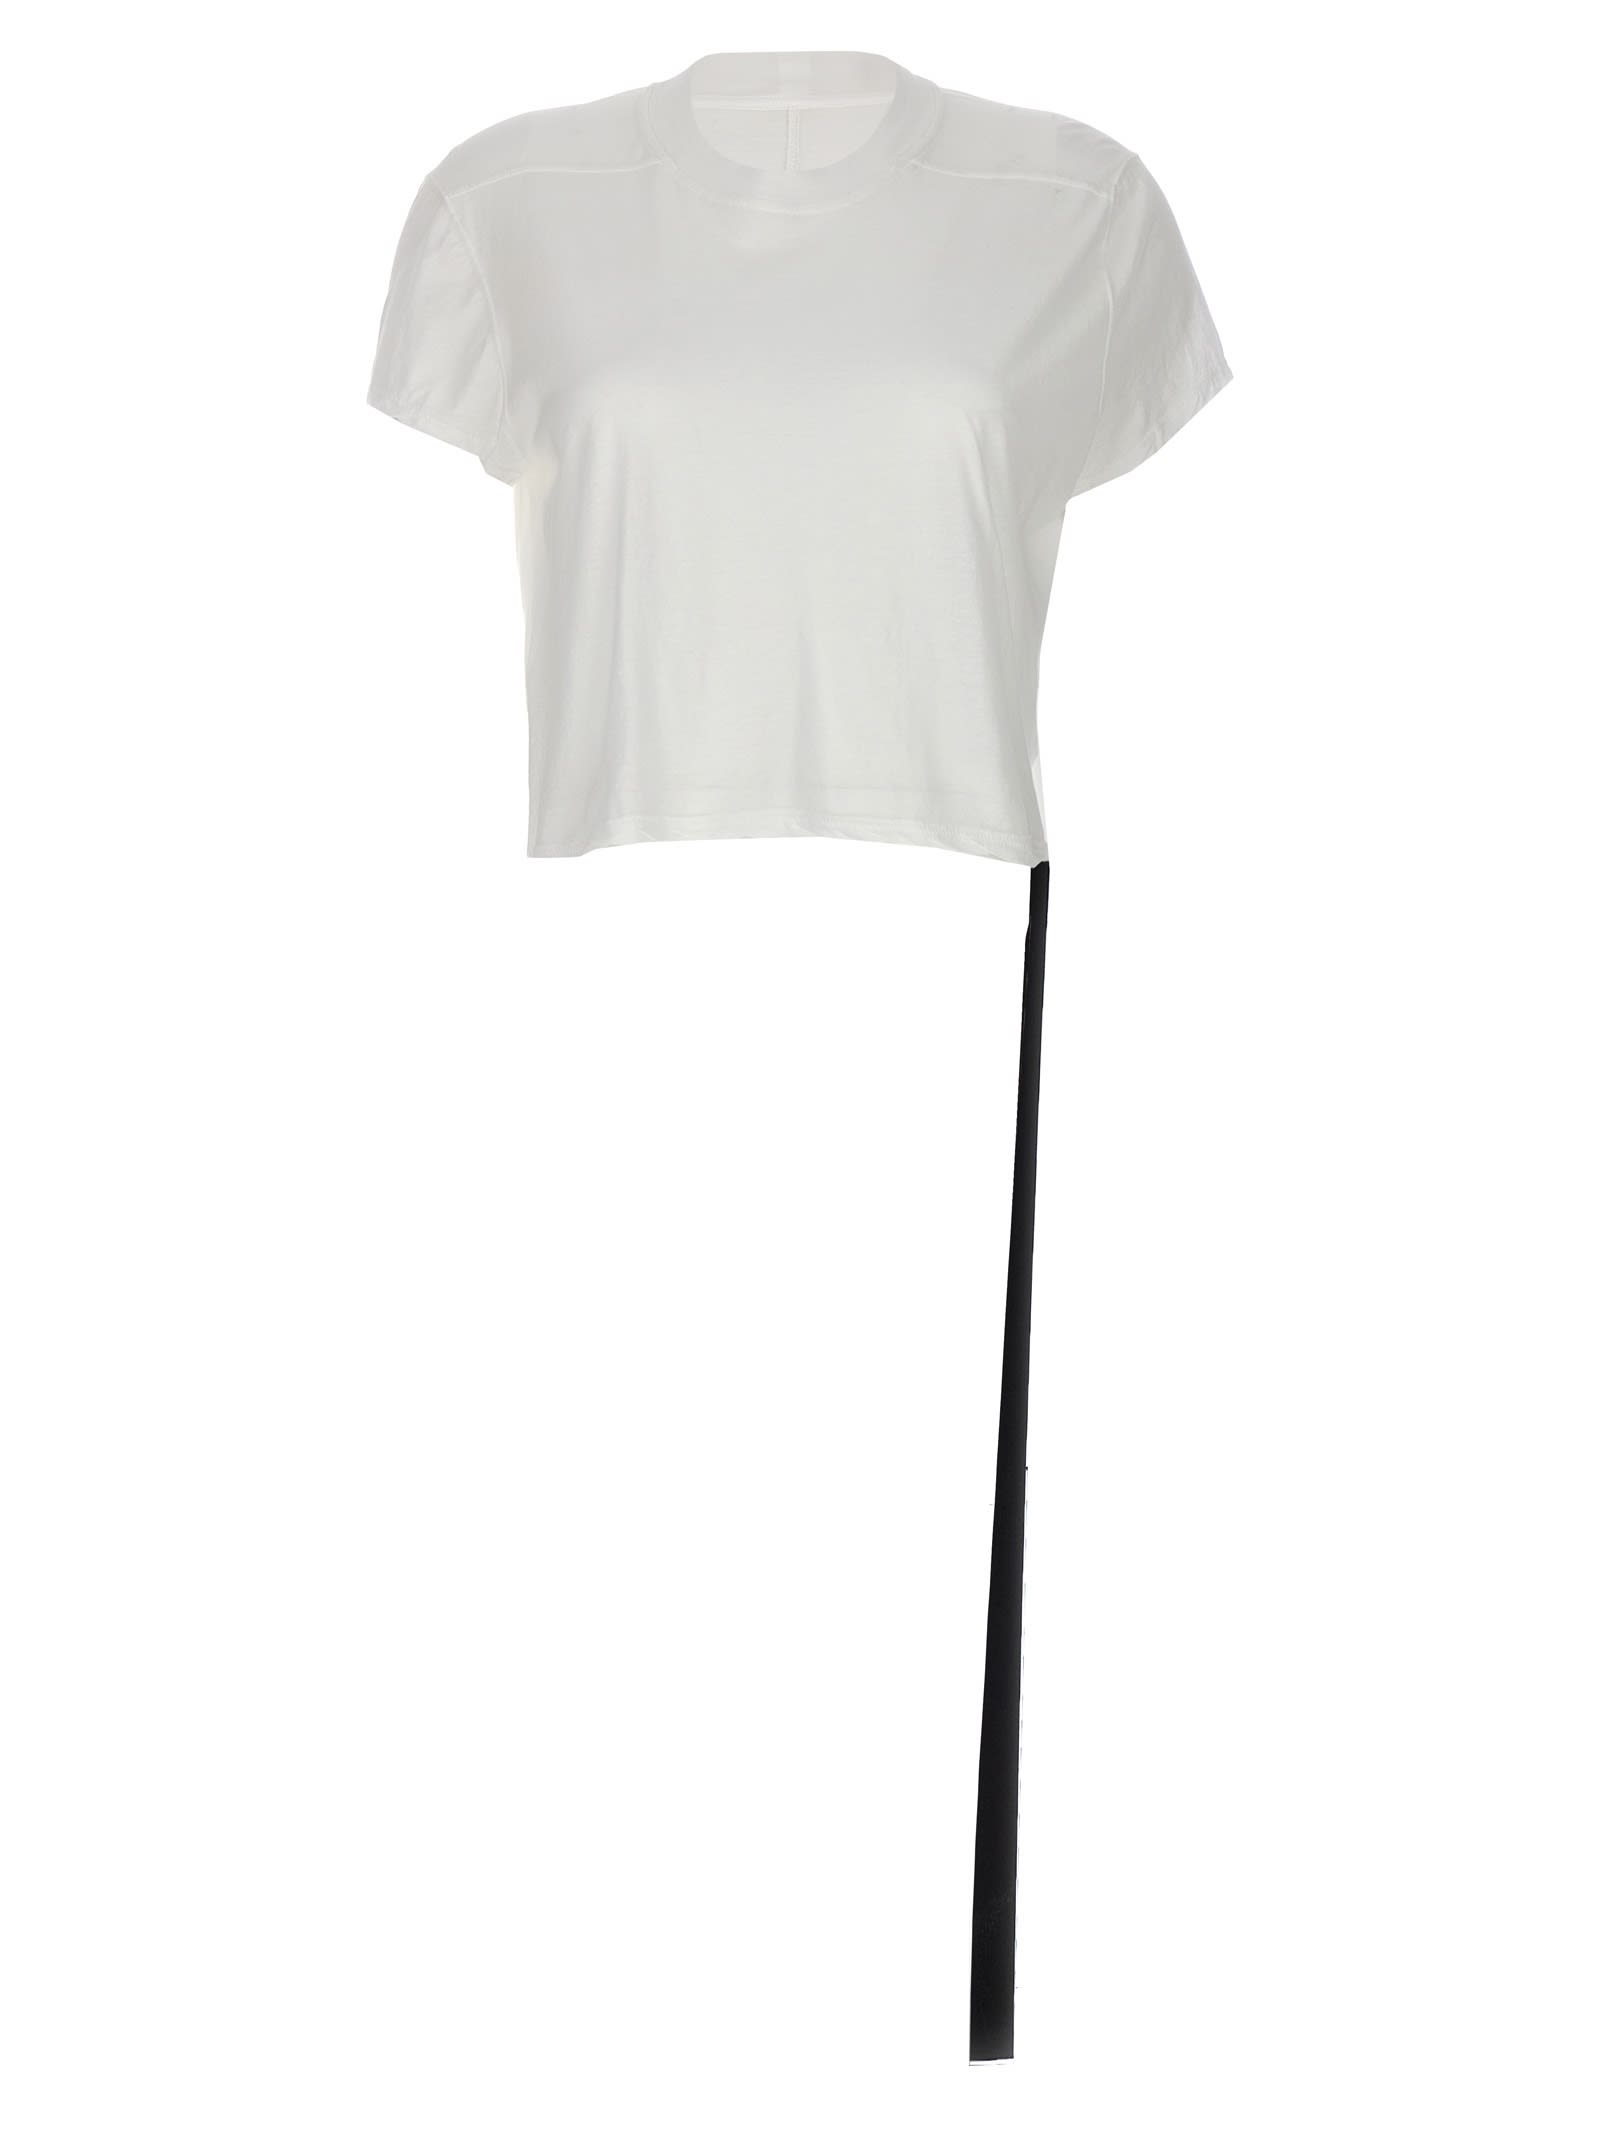 DRKSHDW CROPPED SMALL LEVEL T T-SHIRT